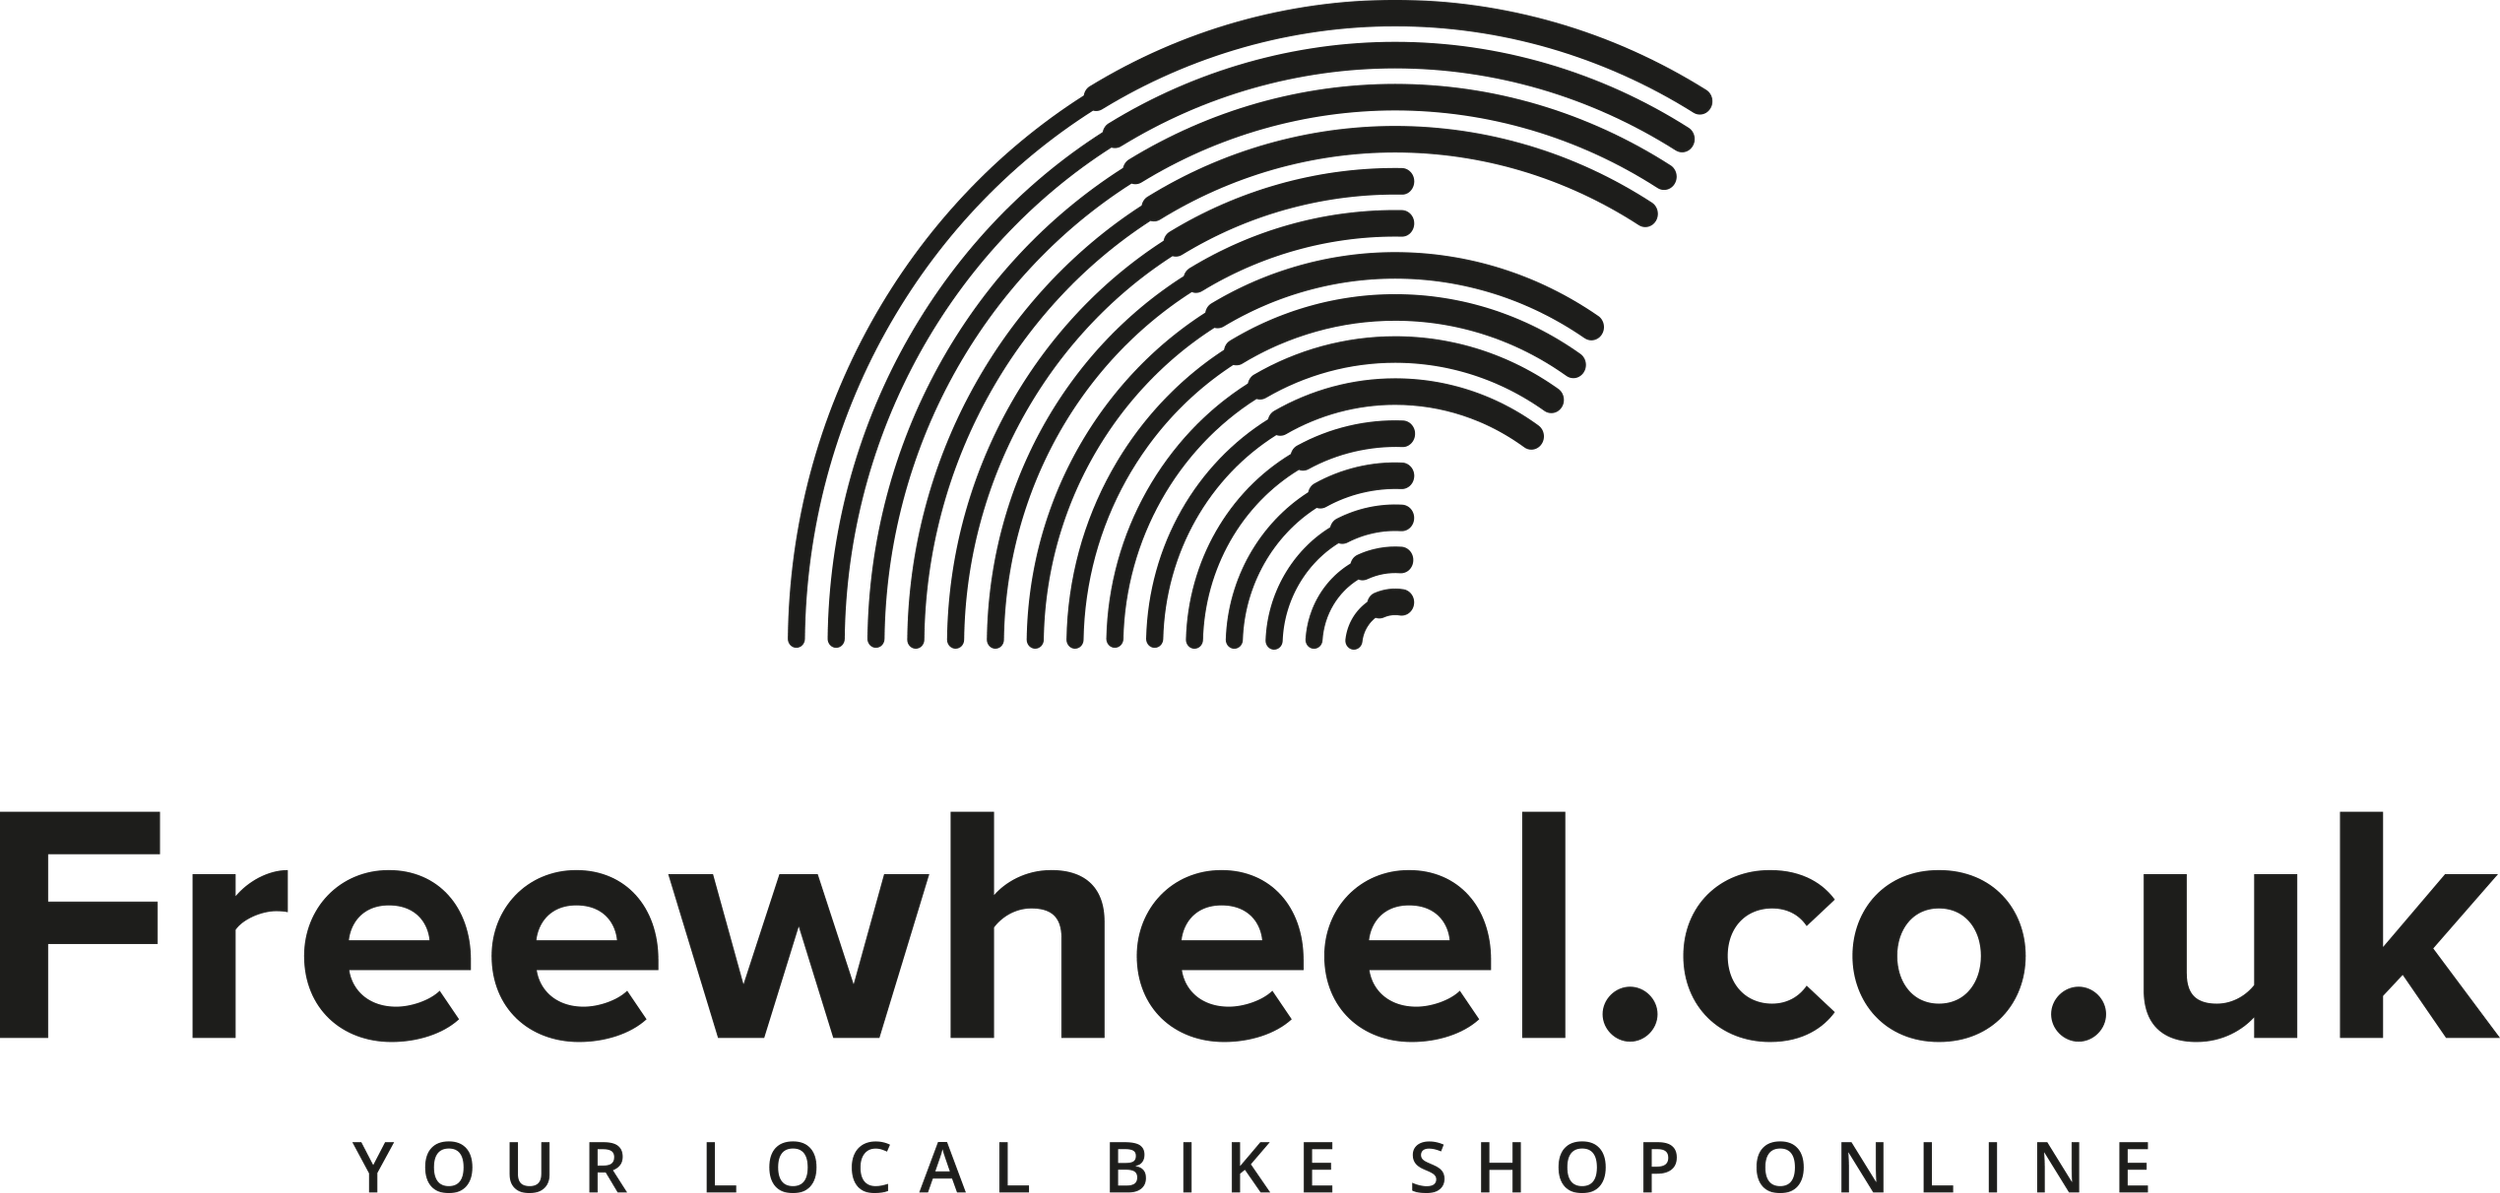 Your Local Bike Shop Online